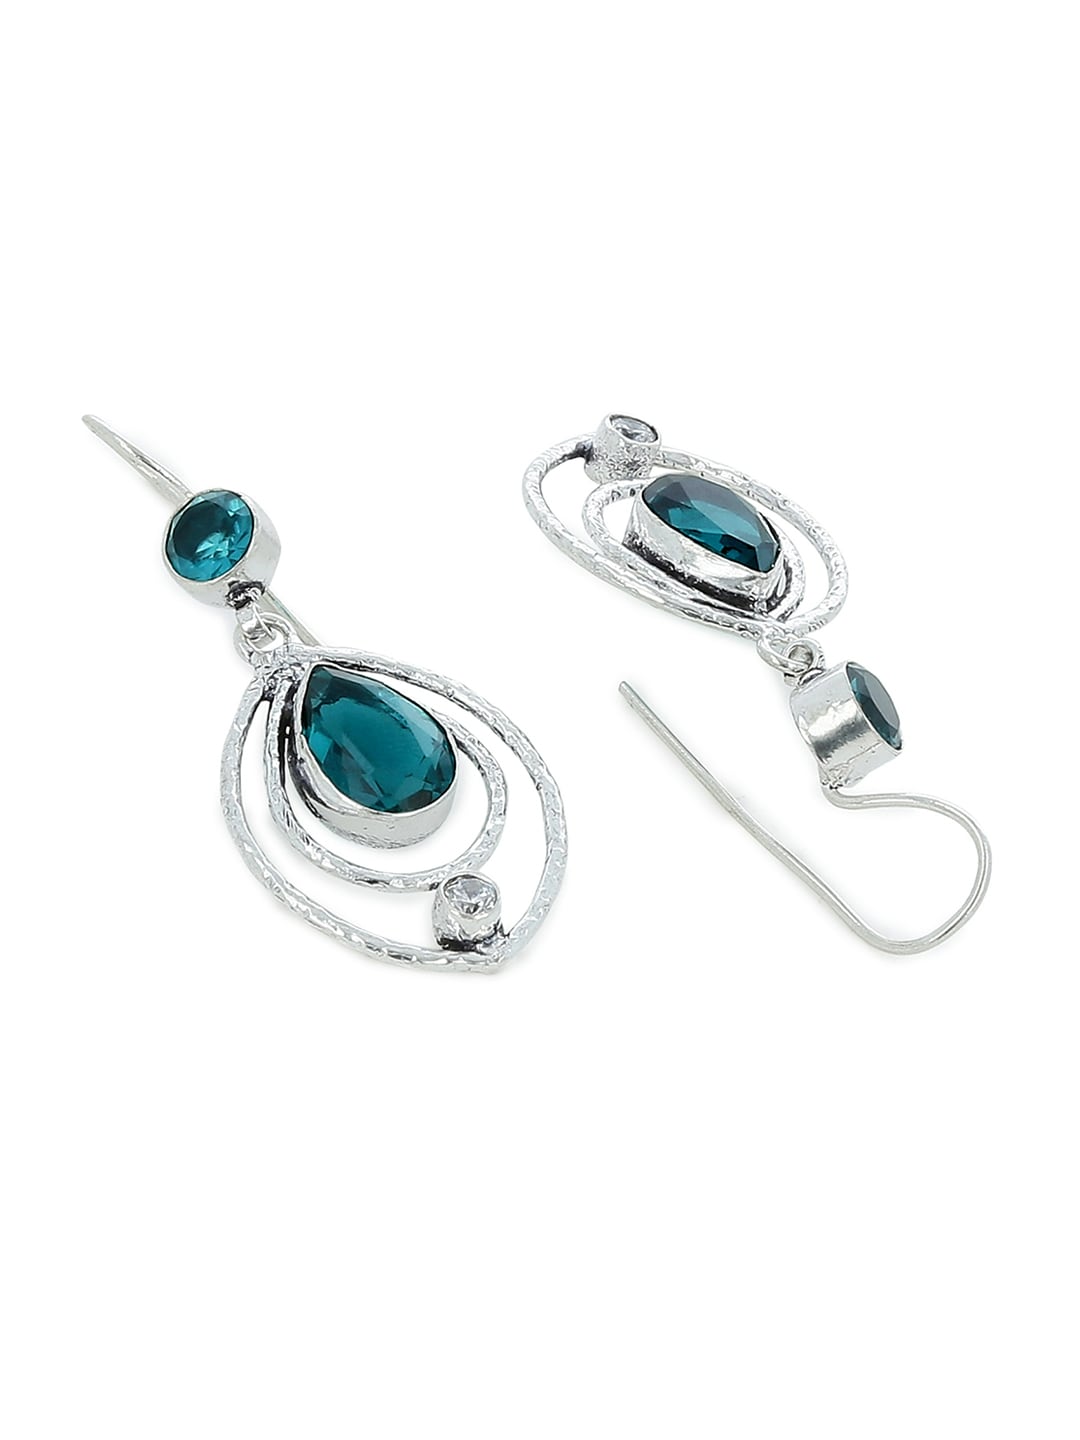 EL REGALO Teal Contemporary Drop Earrings - for Women and Girls
Style ID: 17119264